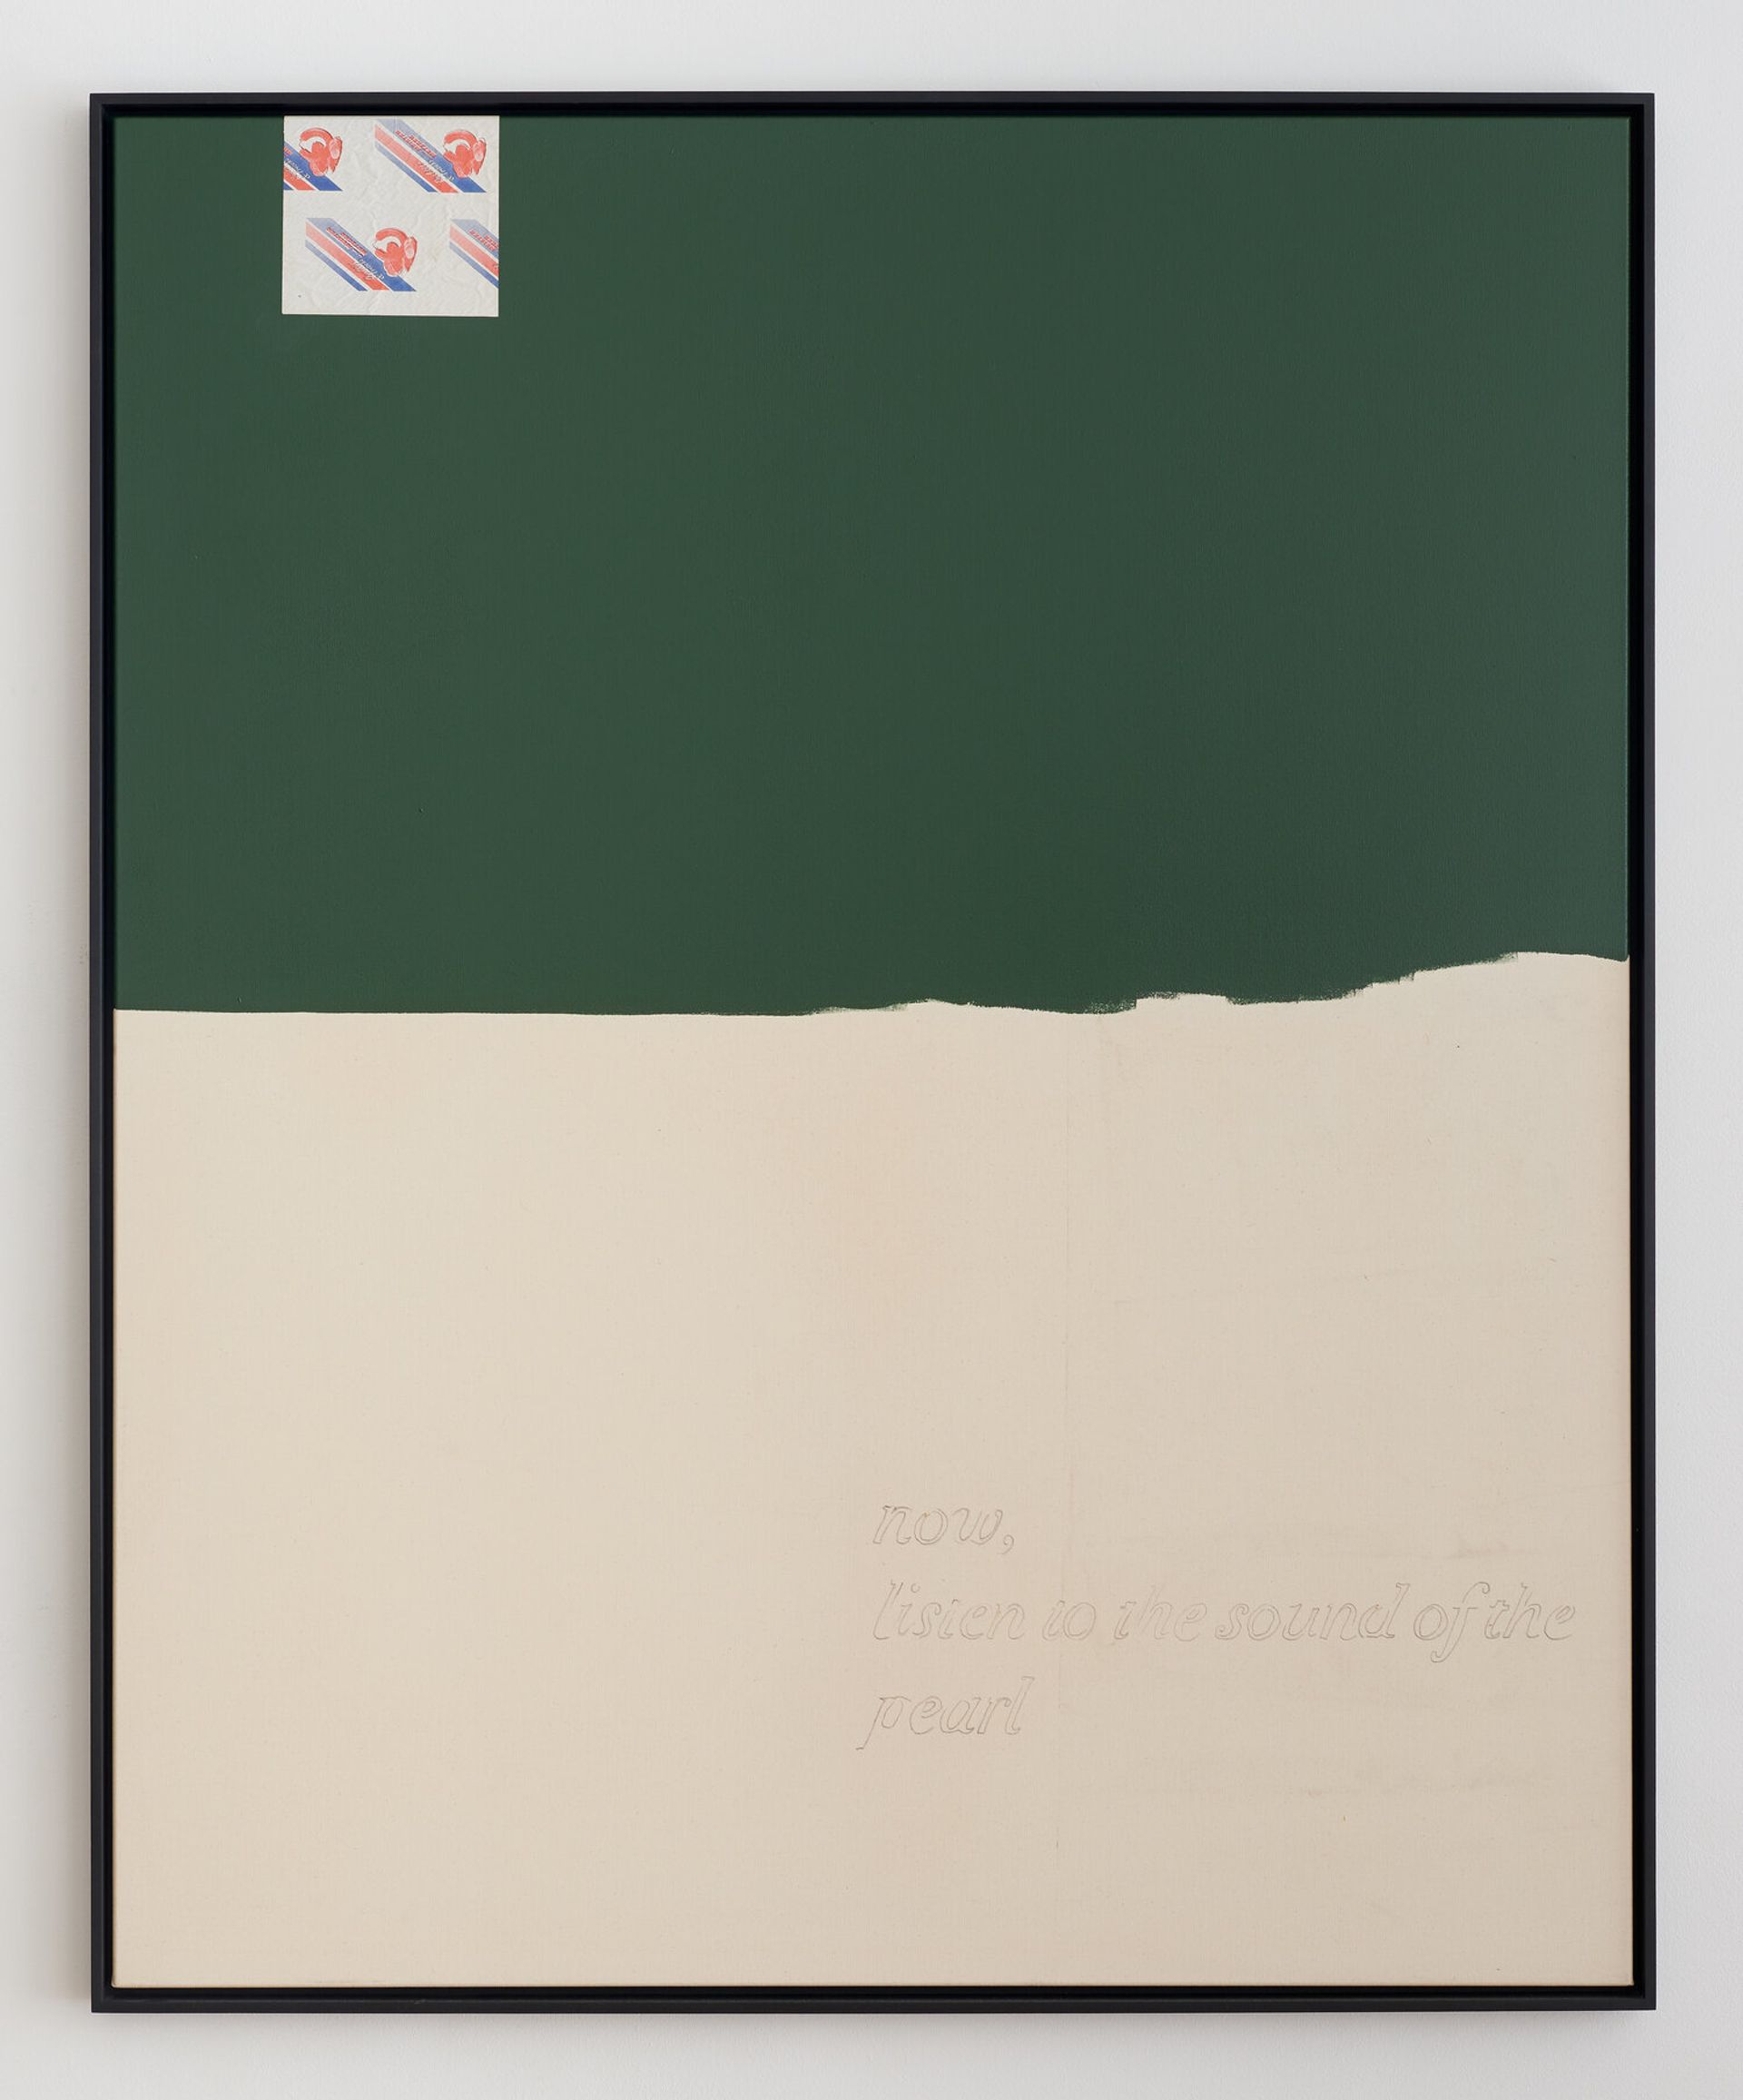 Malte Zenses, pearl, 2018, lacquer, pencil and dirt on canvas, wood, 130 × 160 cm